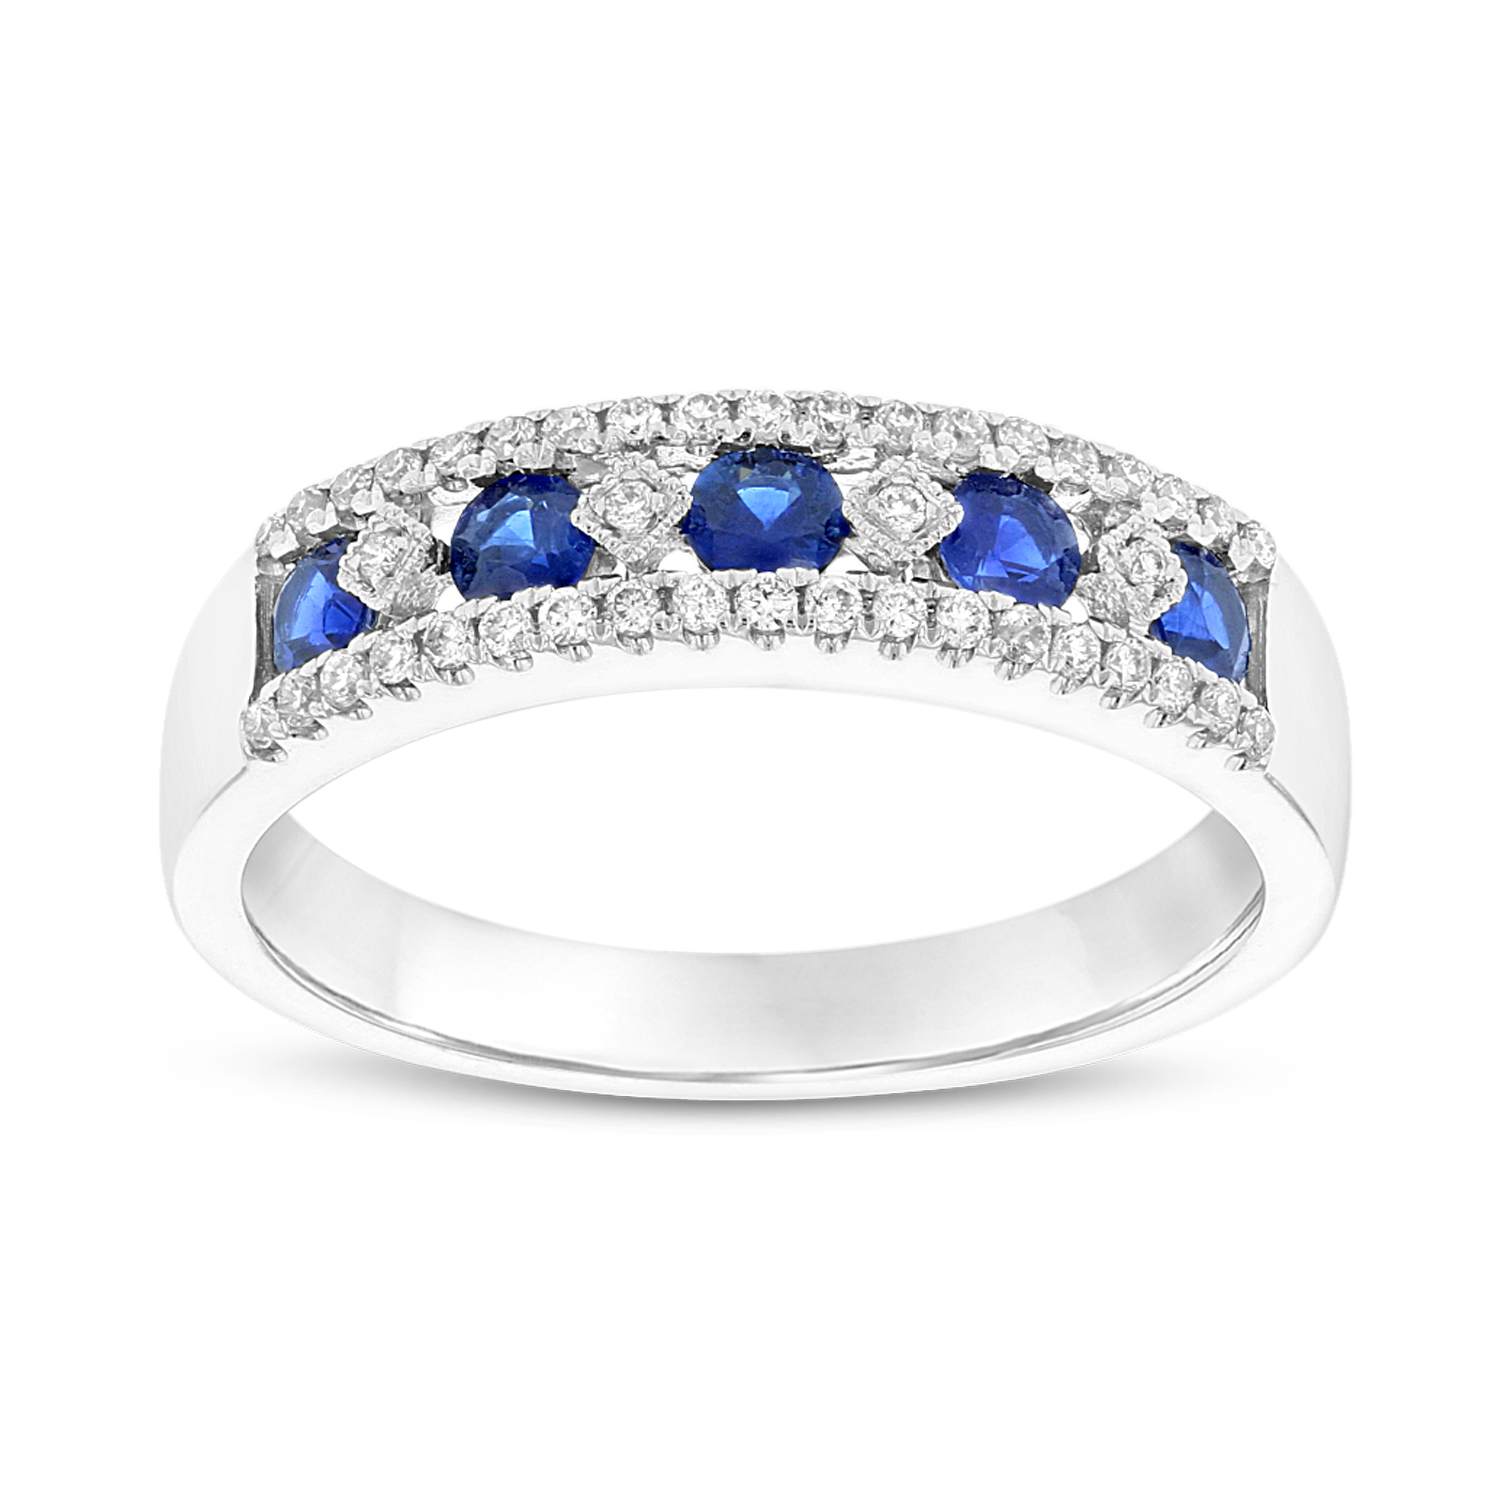 View 0.66cttw Sapphire and Diamond Fashion Wedding Band in 14k White Gold